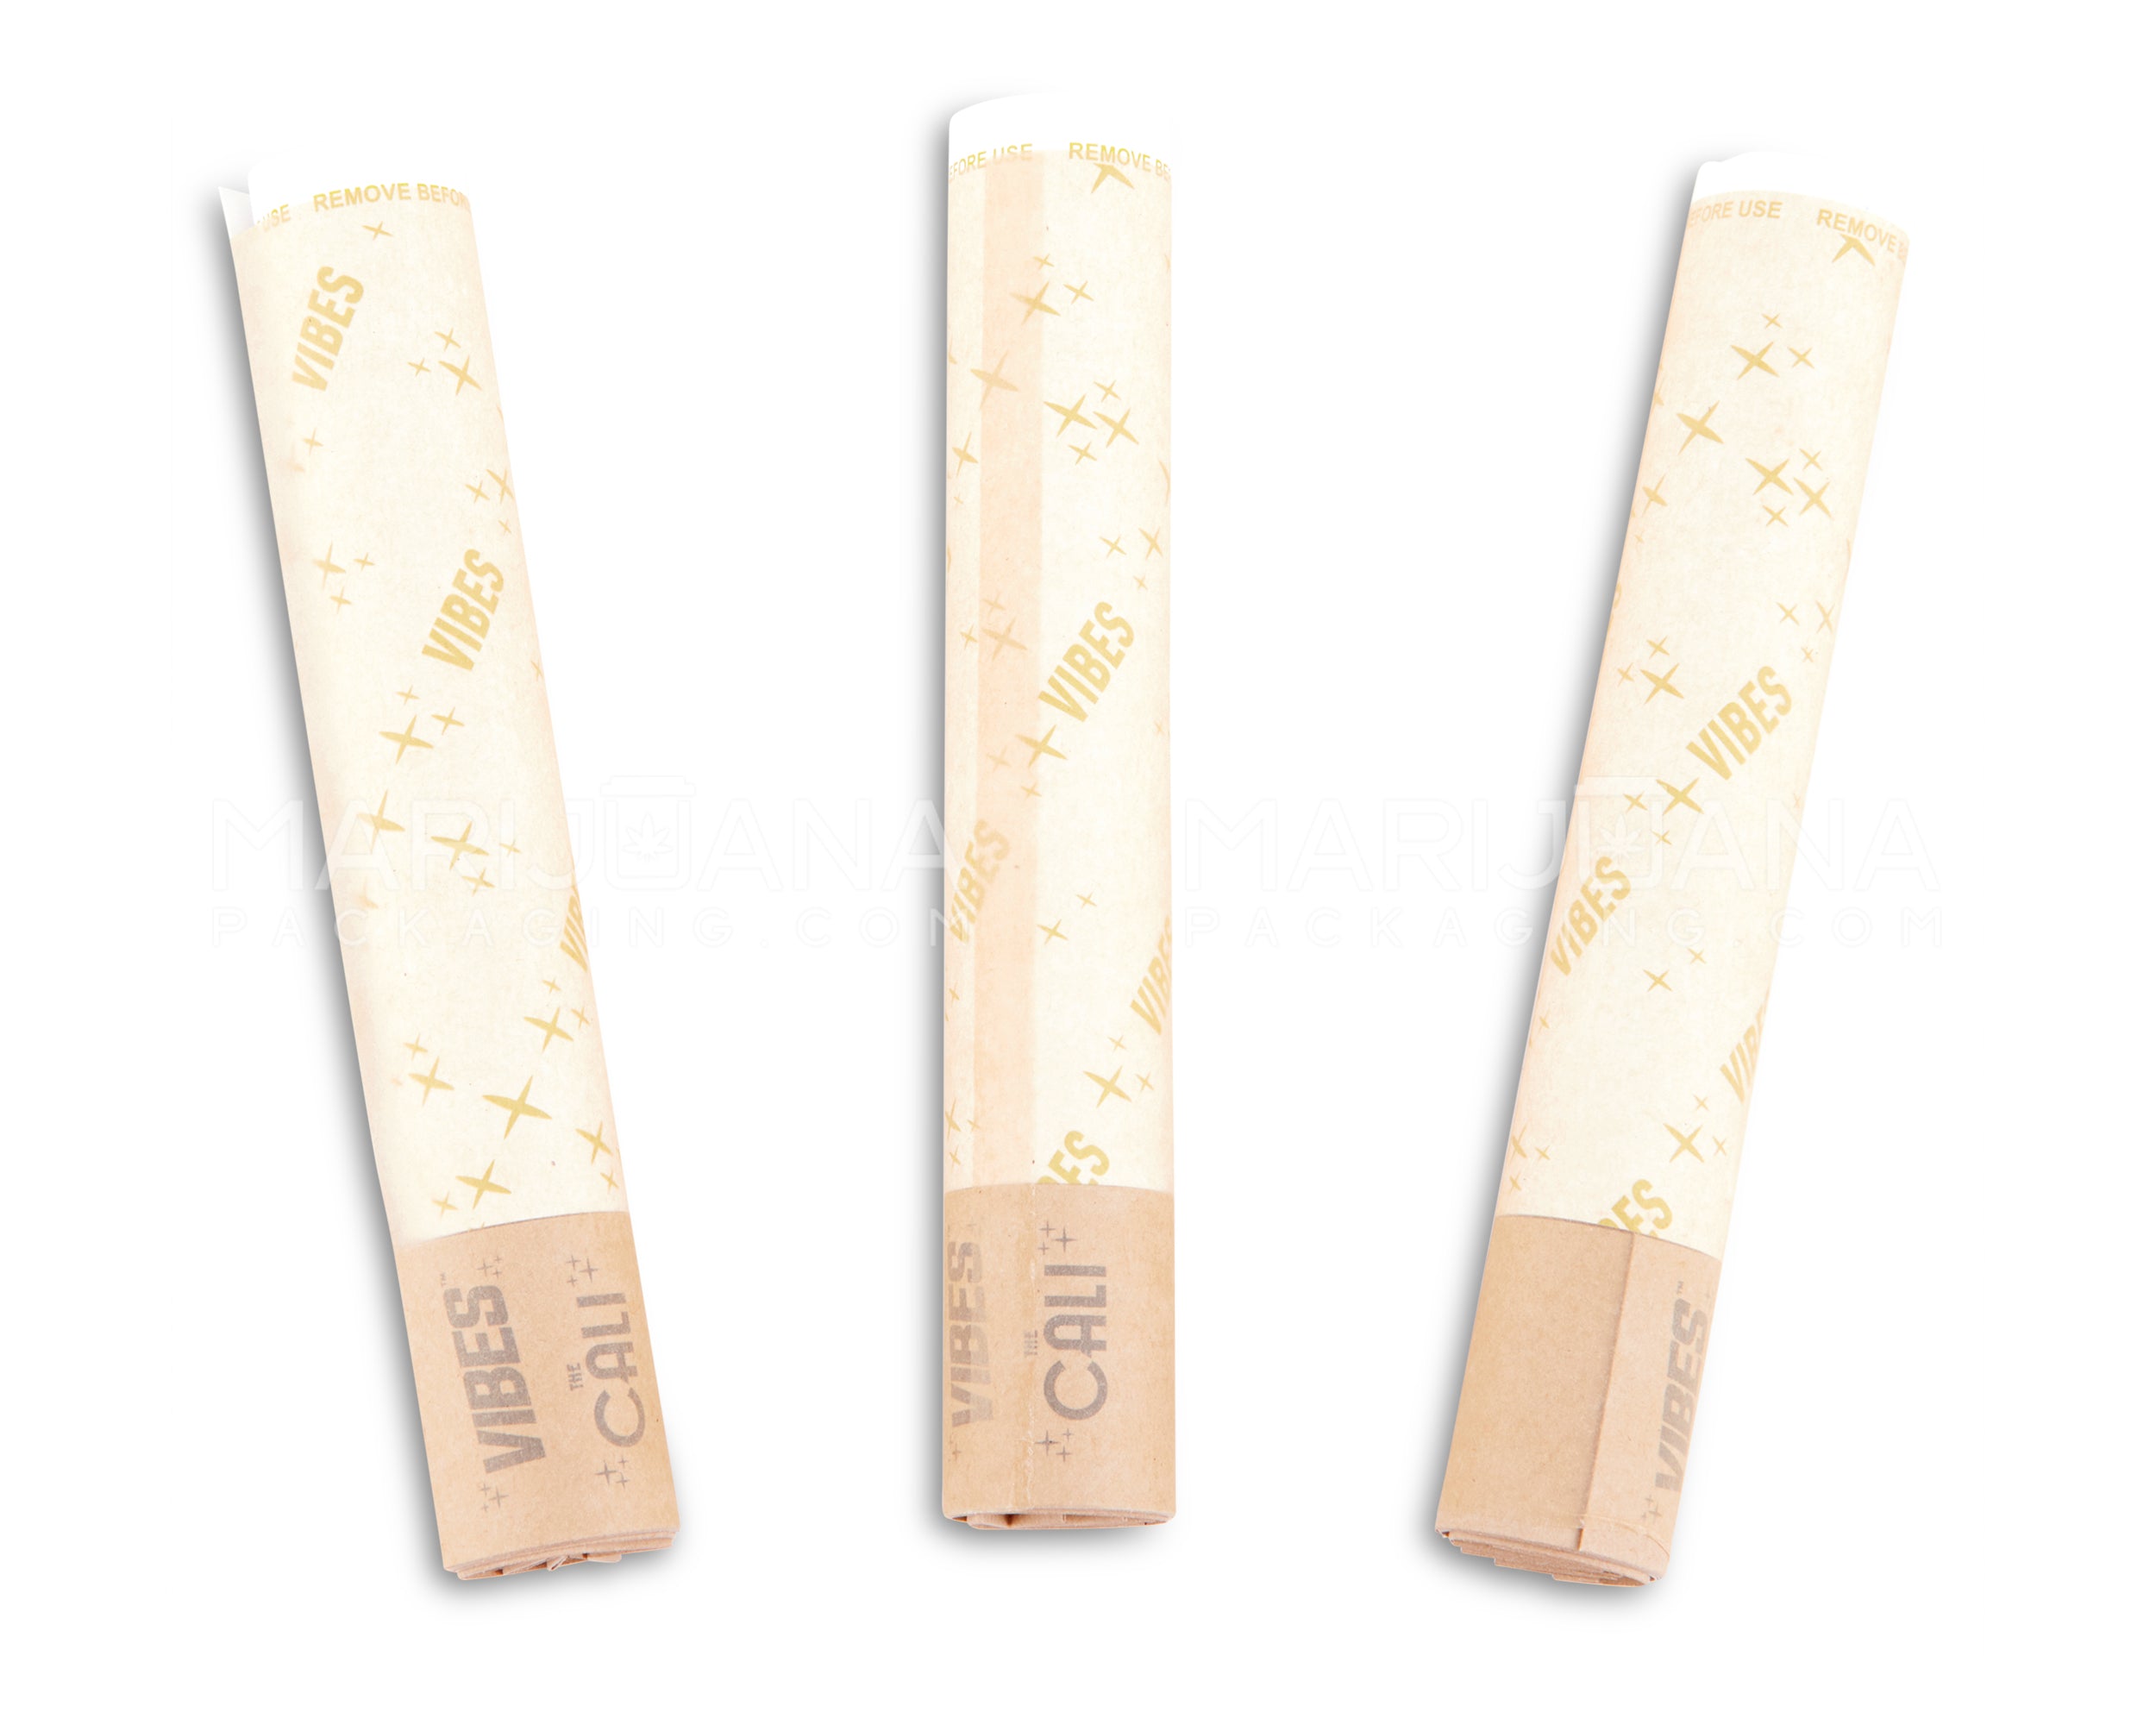 VIBES | 'Retail Display' The Cali 3 Gram Pre-Rolled Cones | 110mm - Ultra Thin Paper - 24 Count - 3